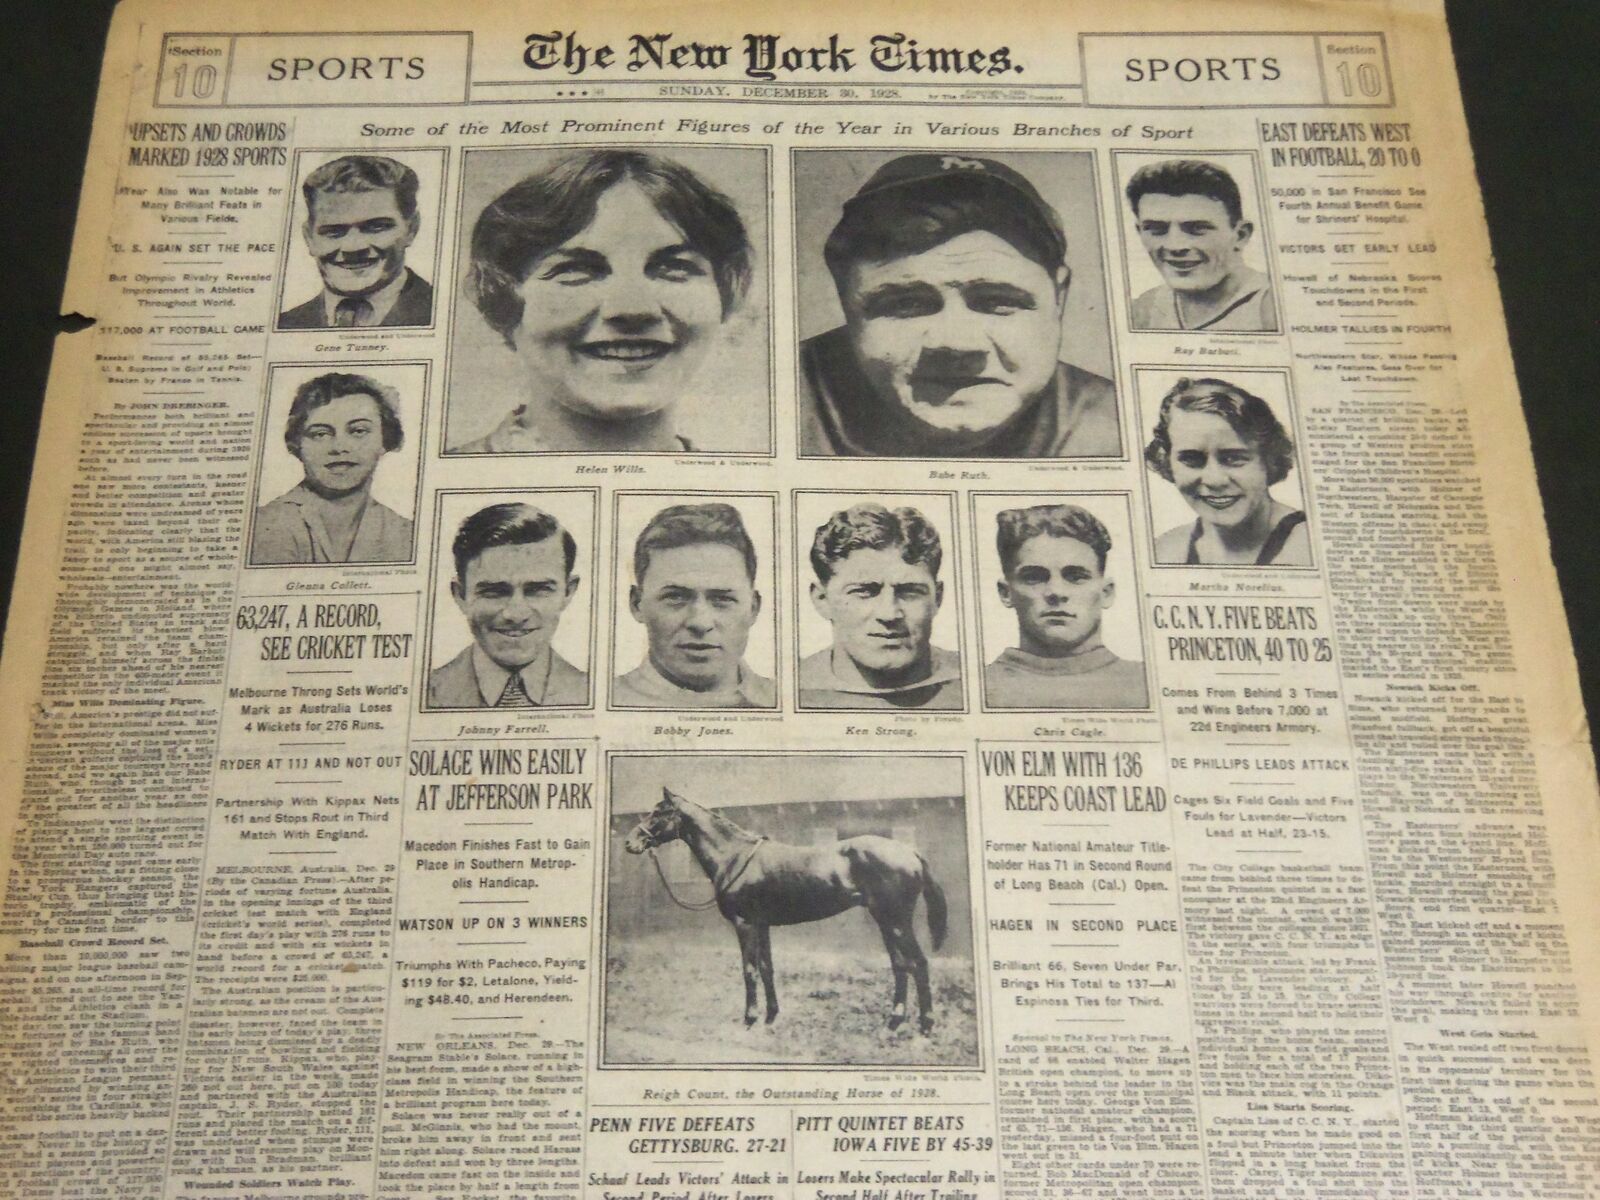 1928 DECEMBER 30 NEW YORK TIMES SPORTS SECTION - RUTH JONES TUNNEY - NT 7122